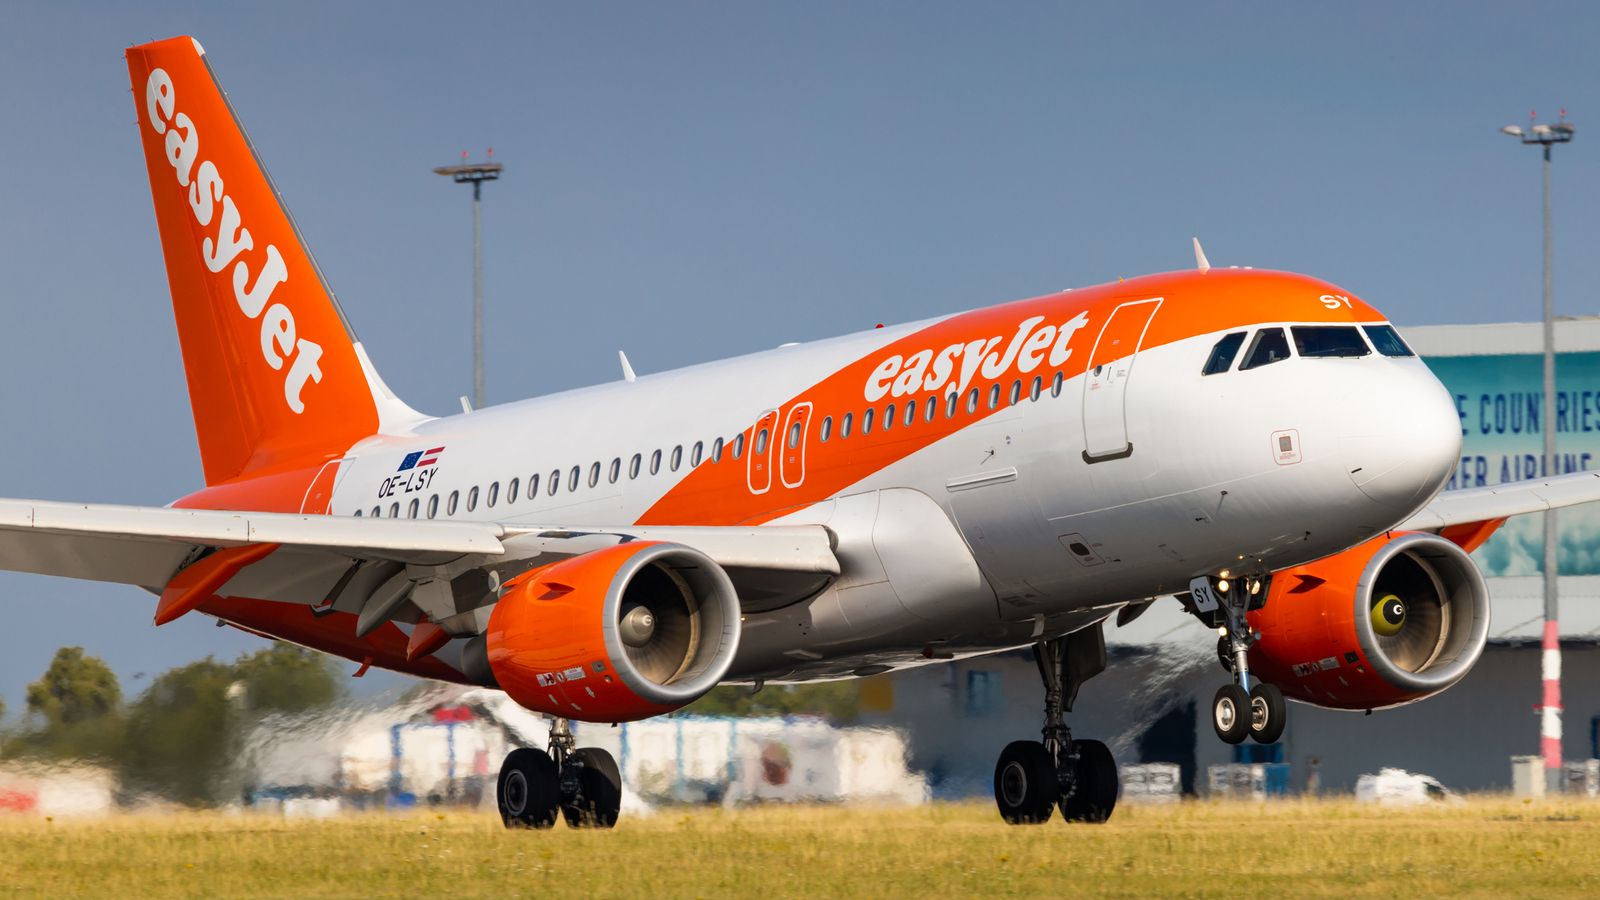 EasyJet say customer satisfaction at levels not seen since 2019 and cancellations as low pre-pandemic